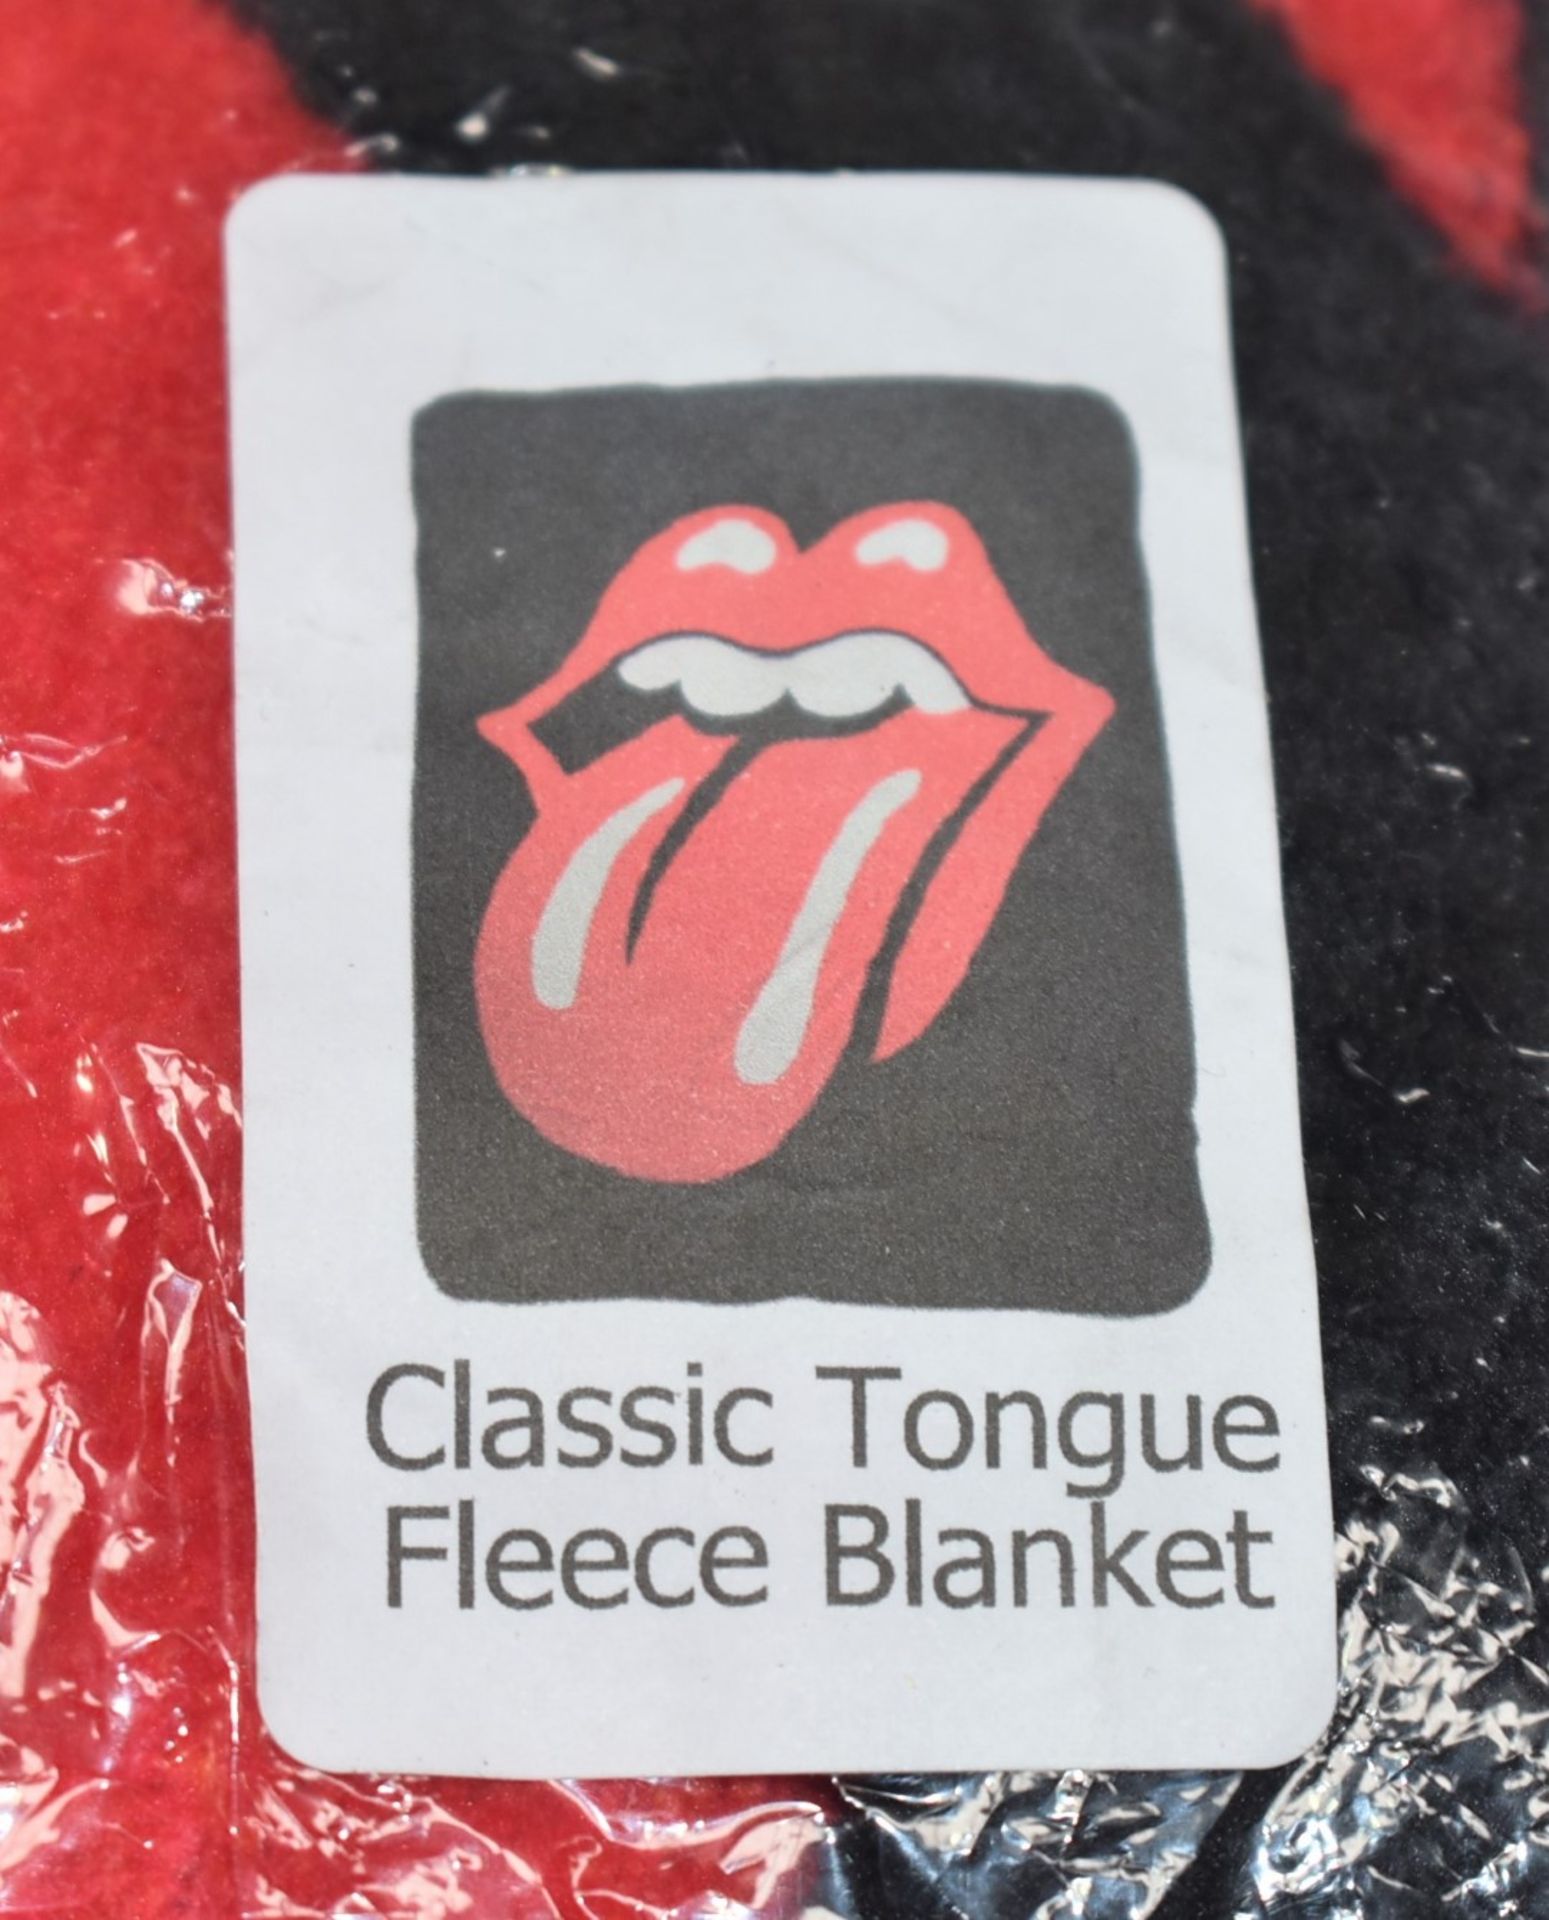 1 x Rolling Stones Large Fleece Blanket - Features the Iconic Tongue and Lips Logo on the Back - - Image 2 of 2